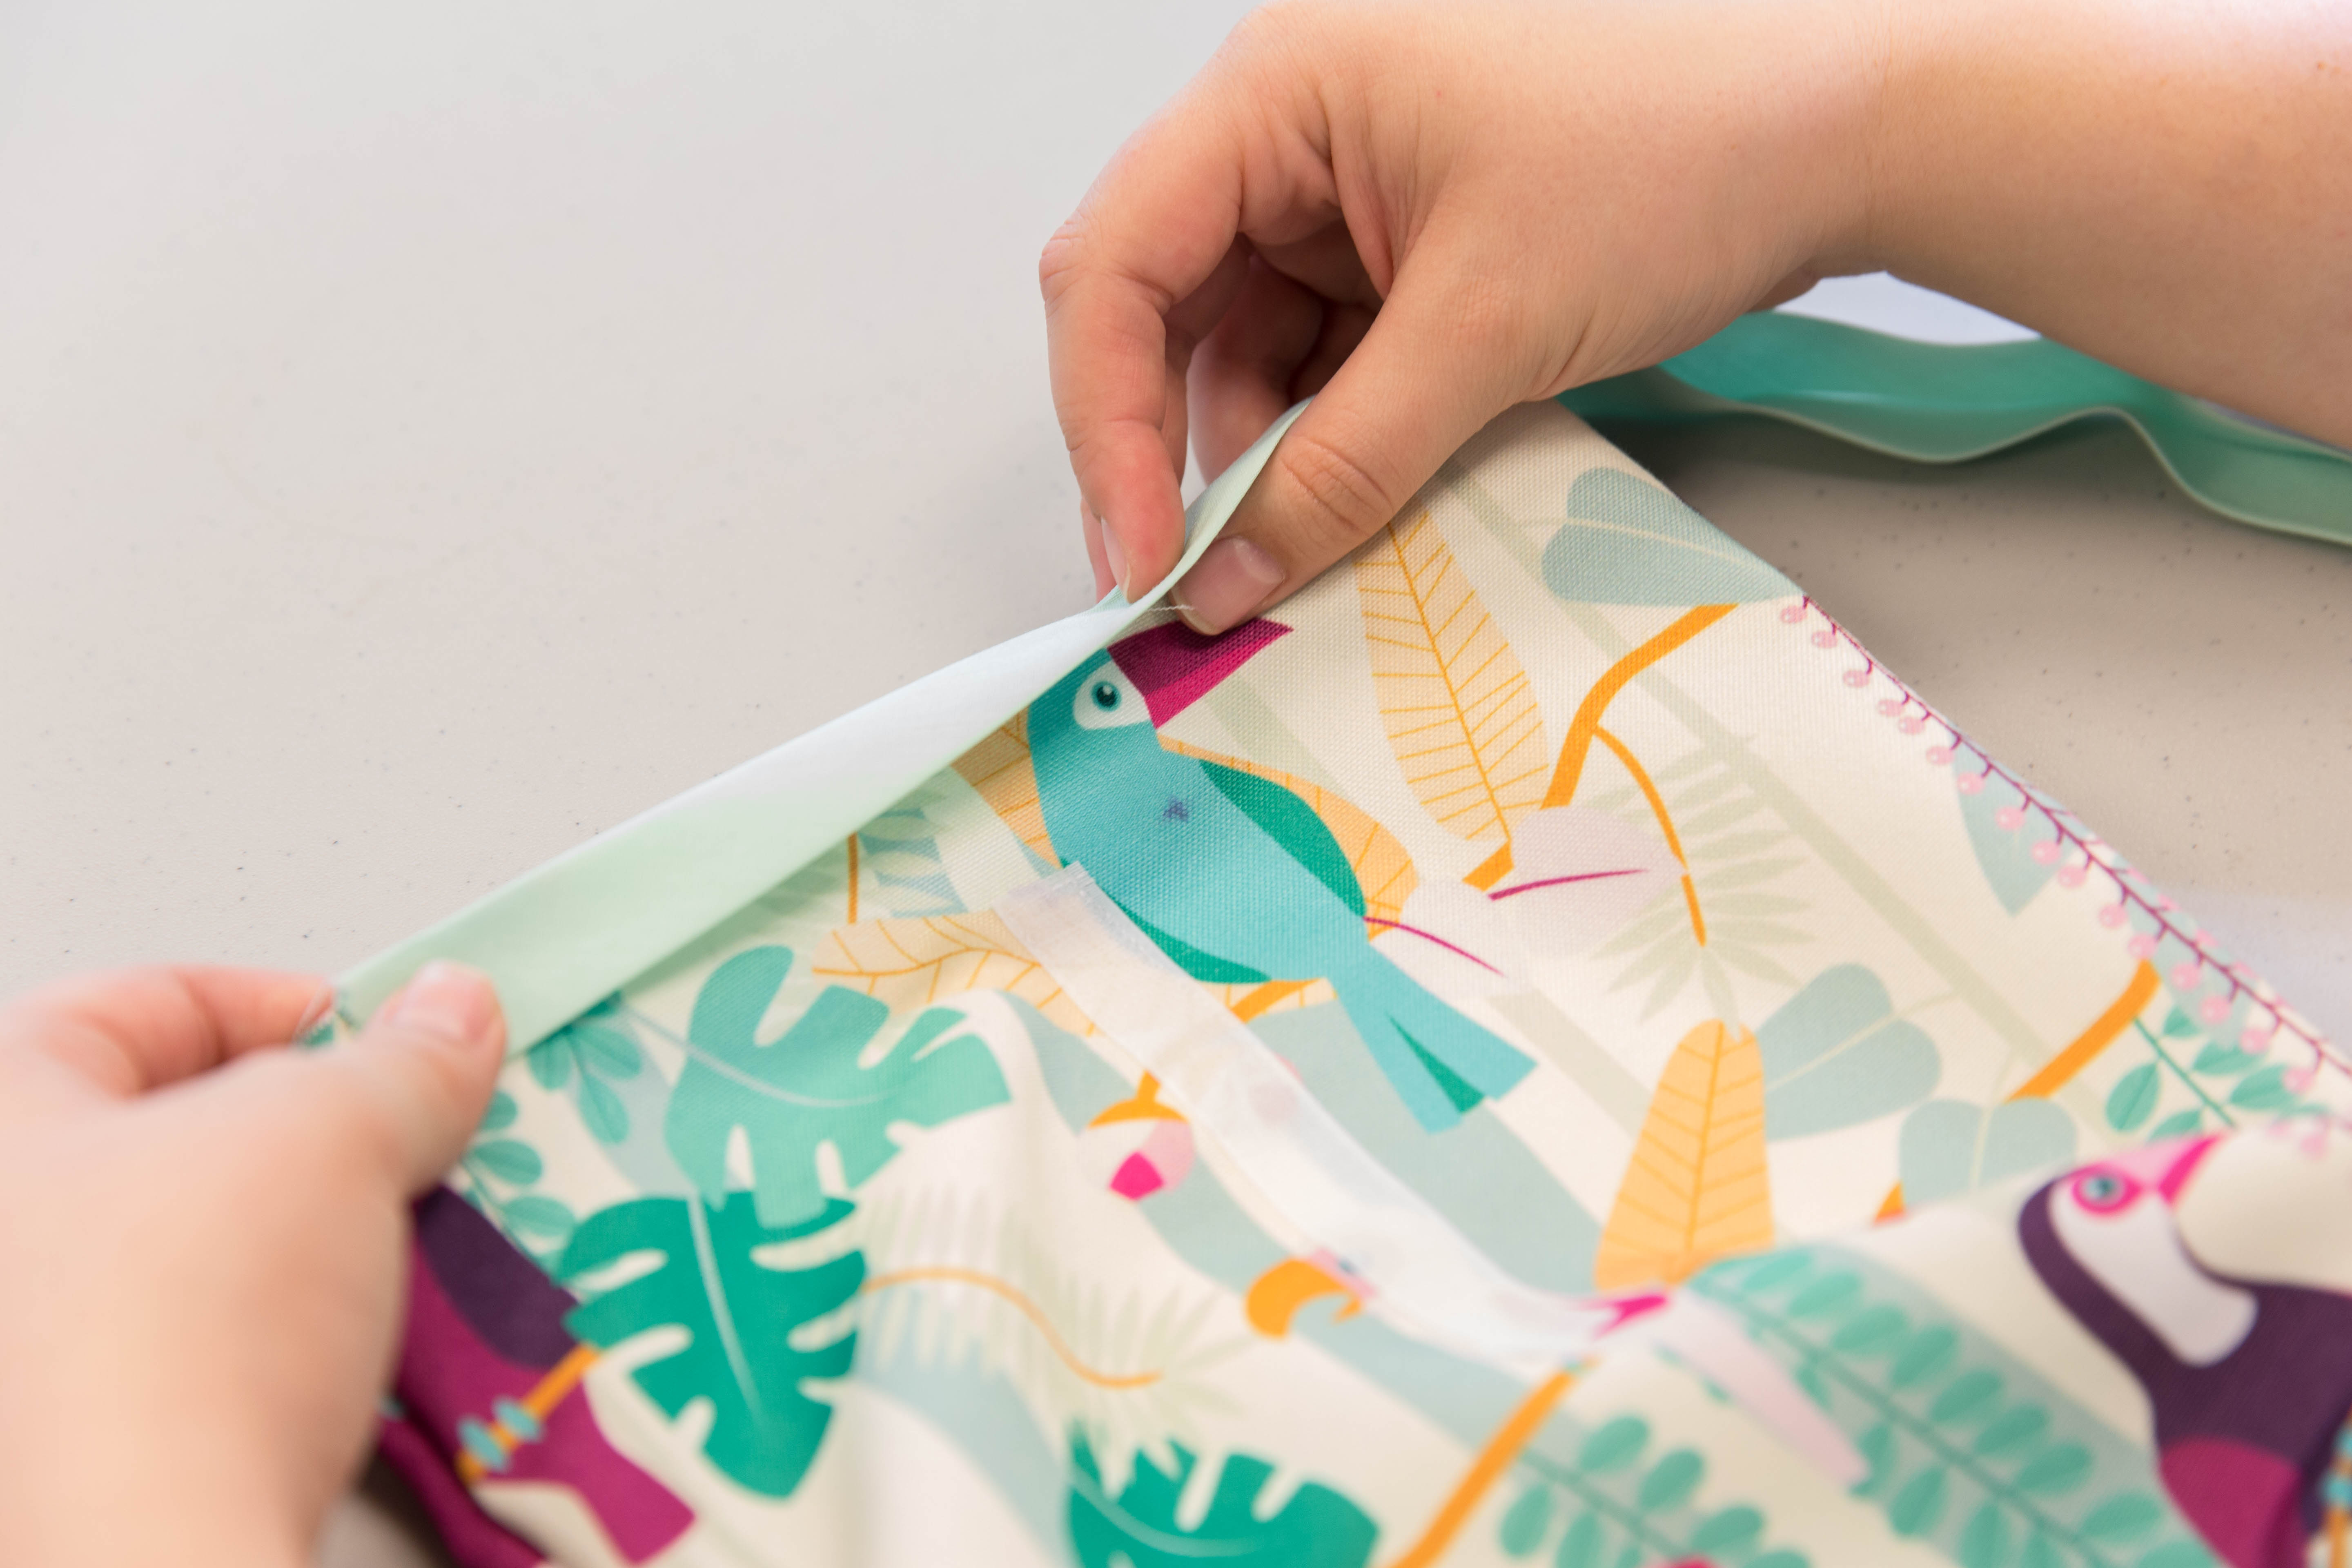 Ace Lunchtime with DIY Kid's Reusable Lunch Bags | Spoonflower Blog 